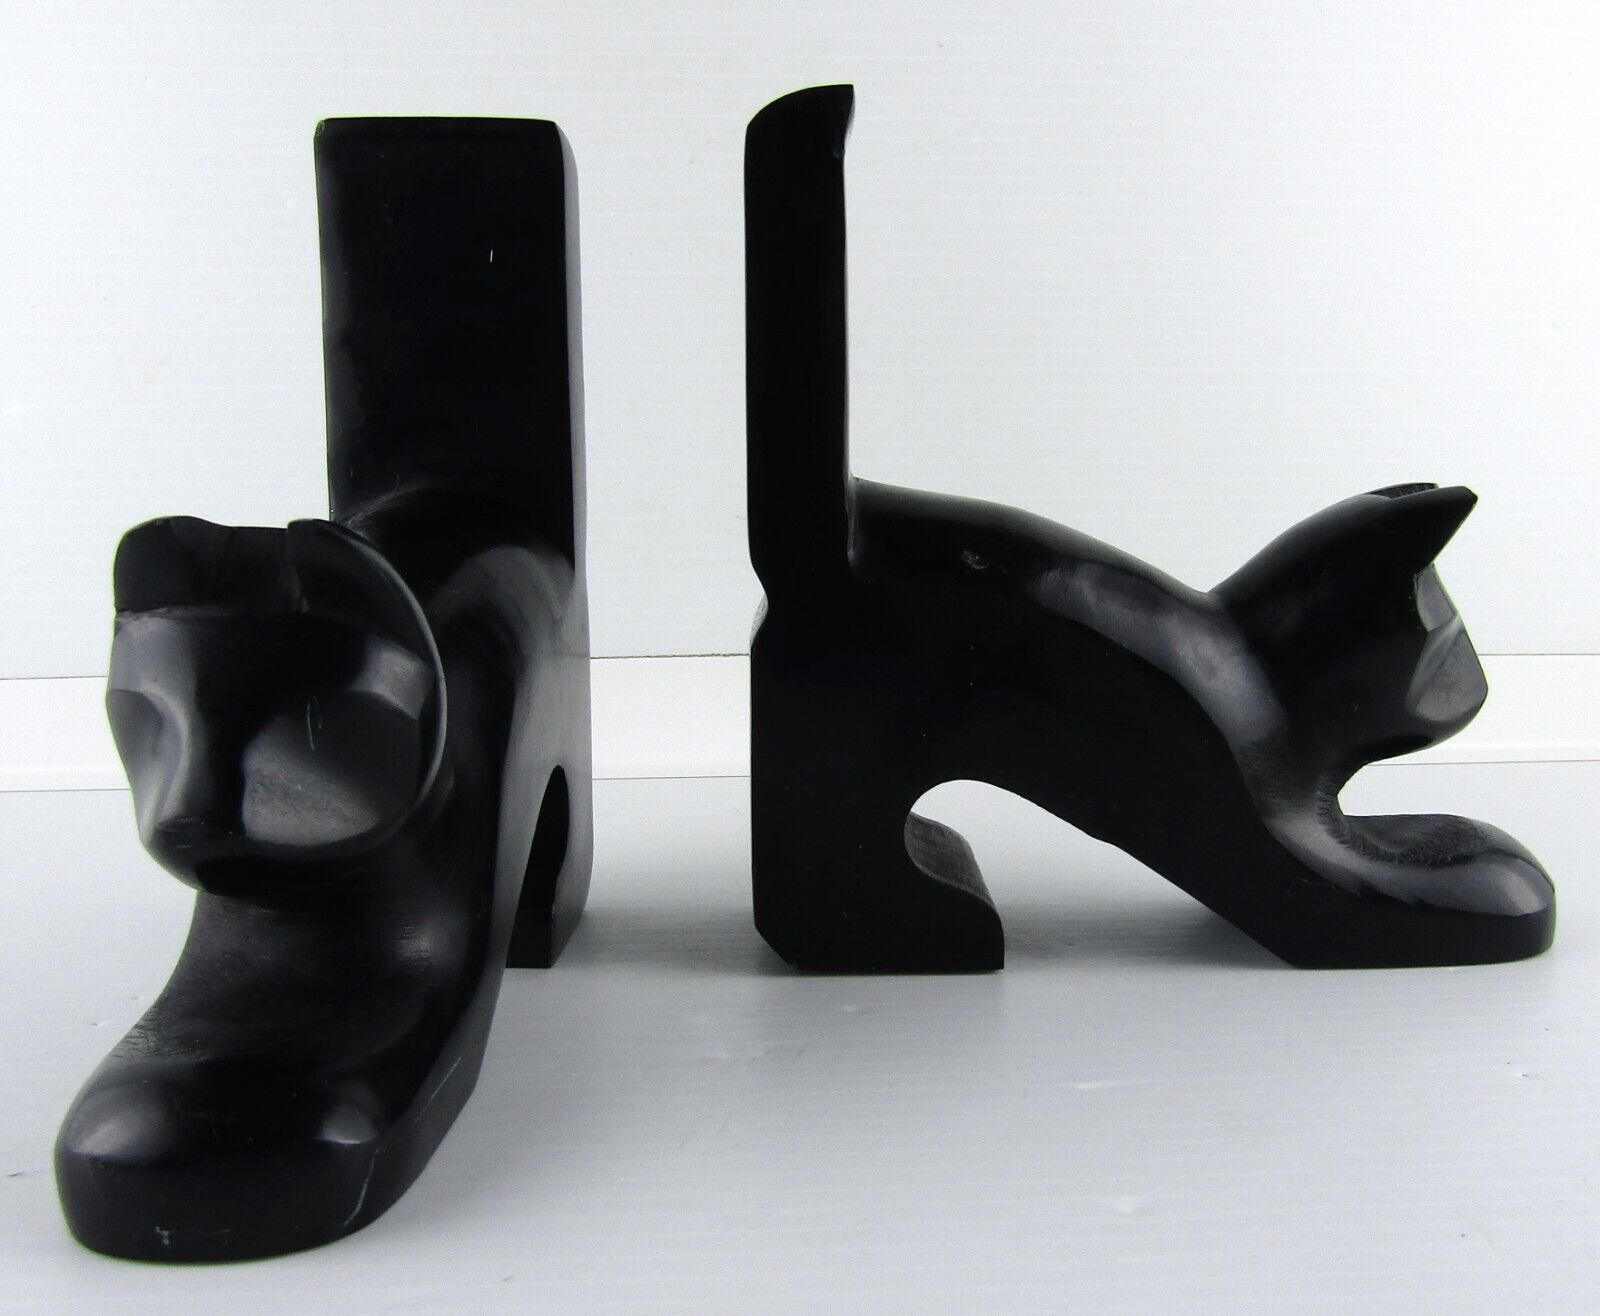 Black Cat Palewa Solid Soapstone Bookends Playful Decoration Set of 2 Heavy